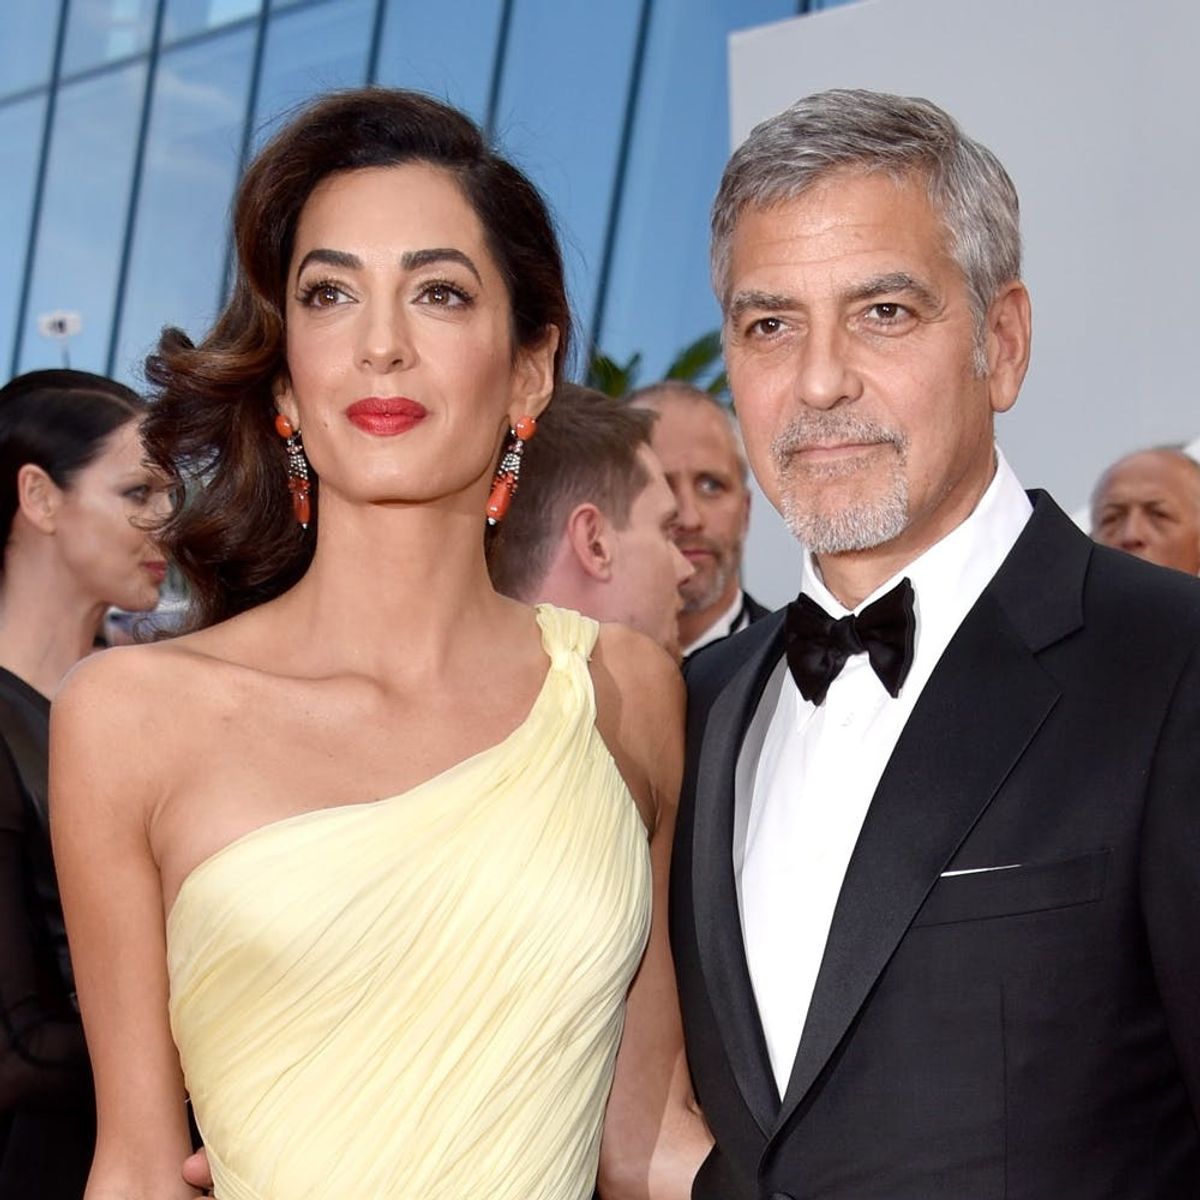 George and Amal Clooney’s Twins Have Arrived!